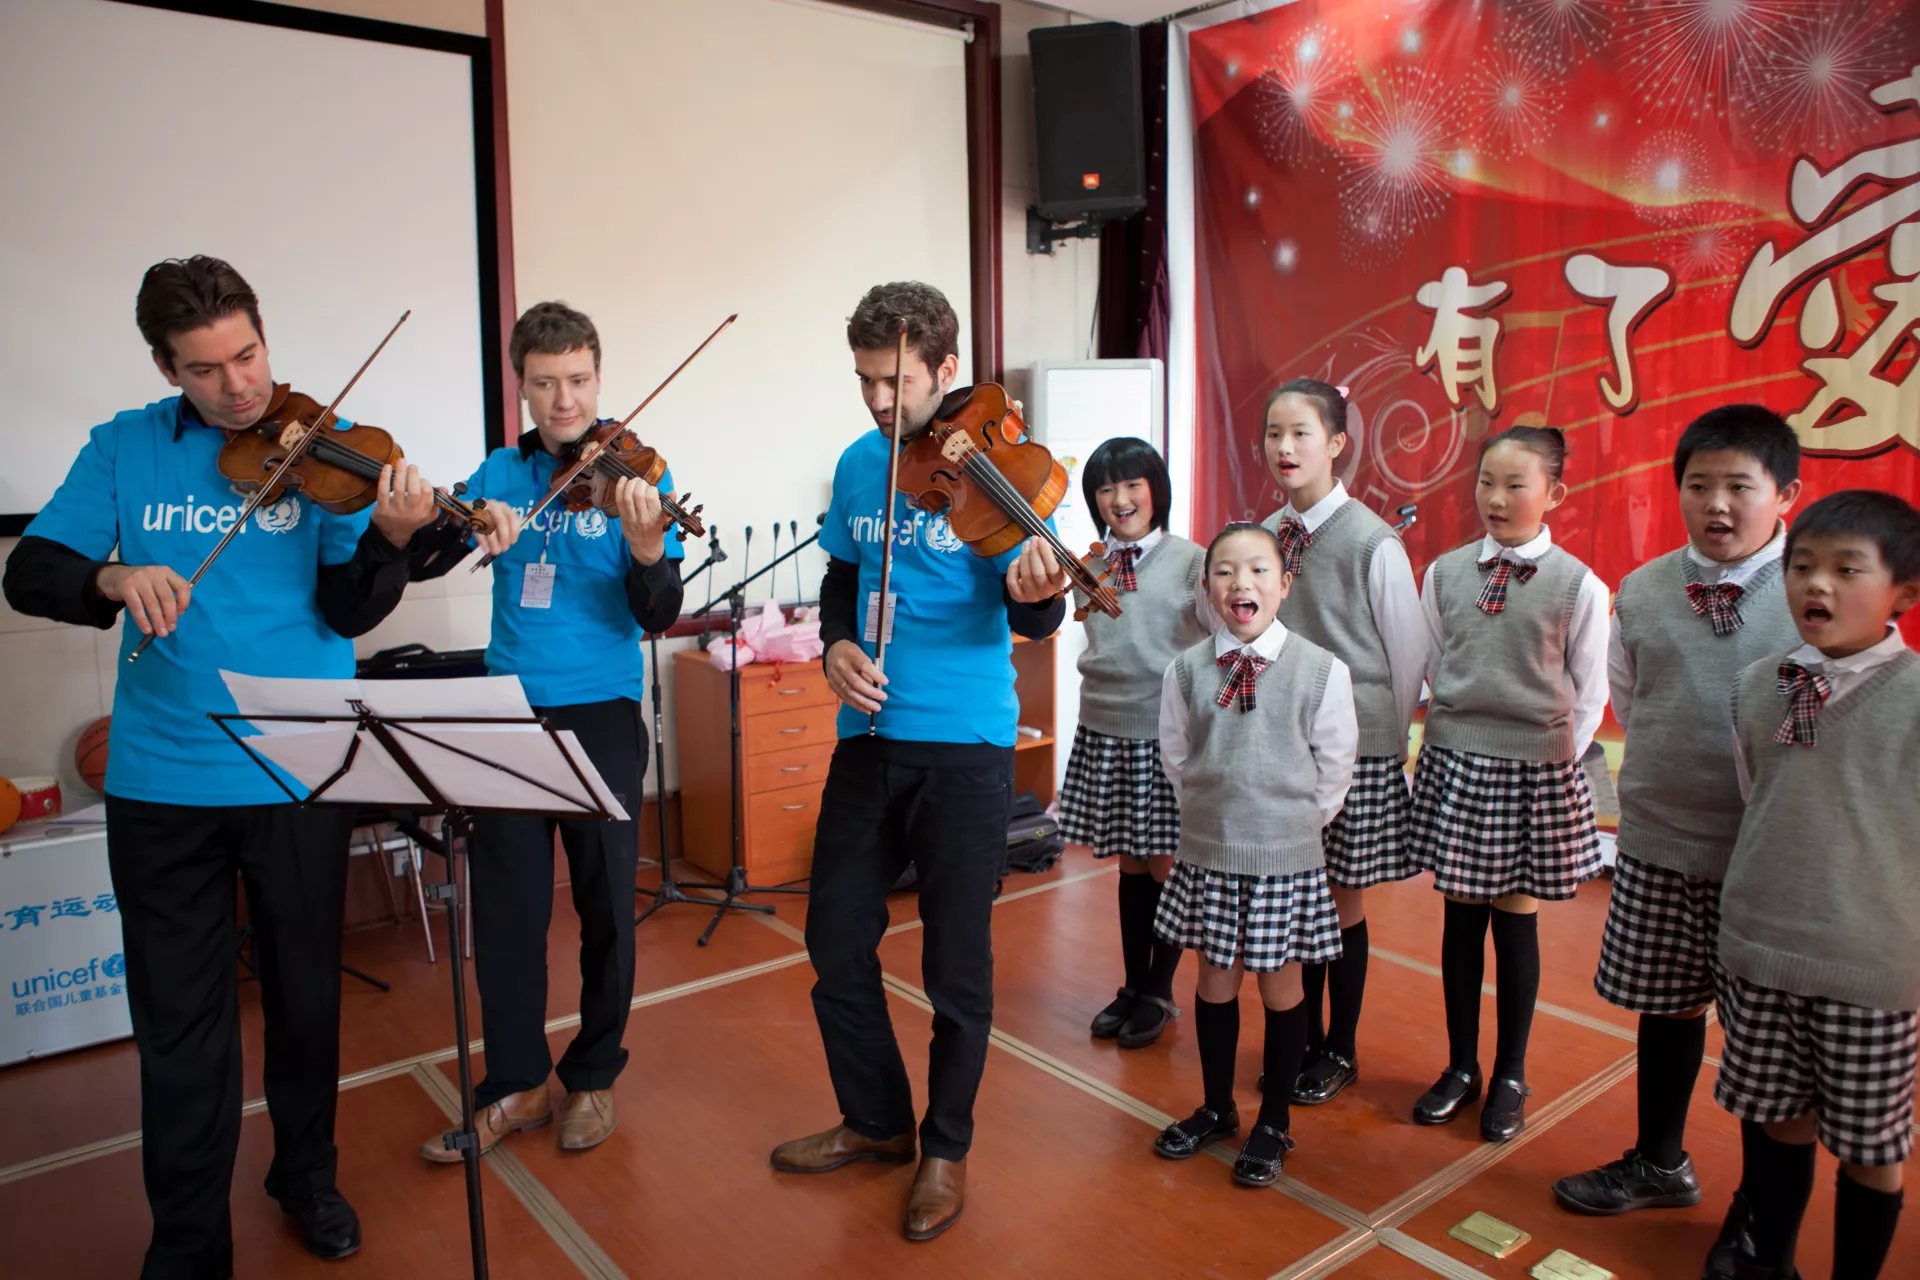 Violist Micha Afkham (center) and violinist Krzysztof Polonek (right) of the Berlin Philharmonic prepare to perform at the Shangzhuang Zhongxin Primary School on 9 November 2011.